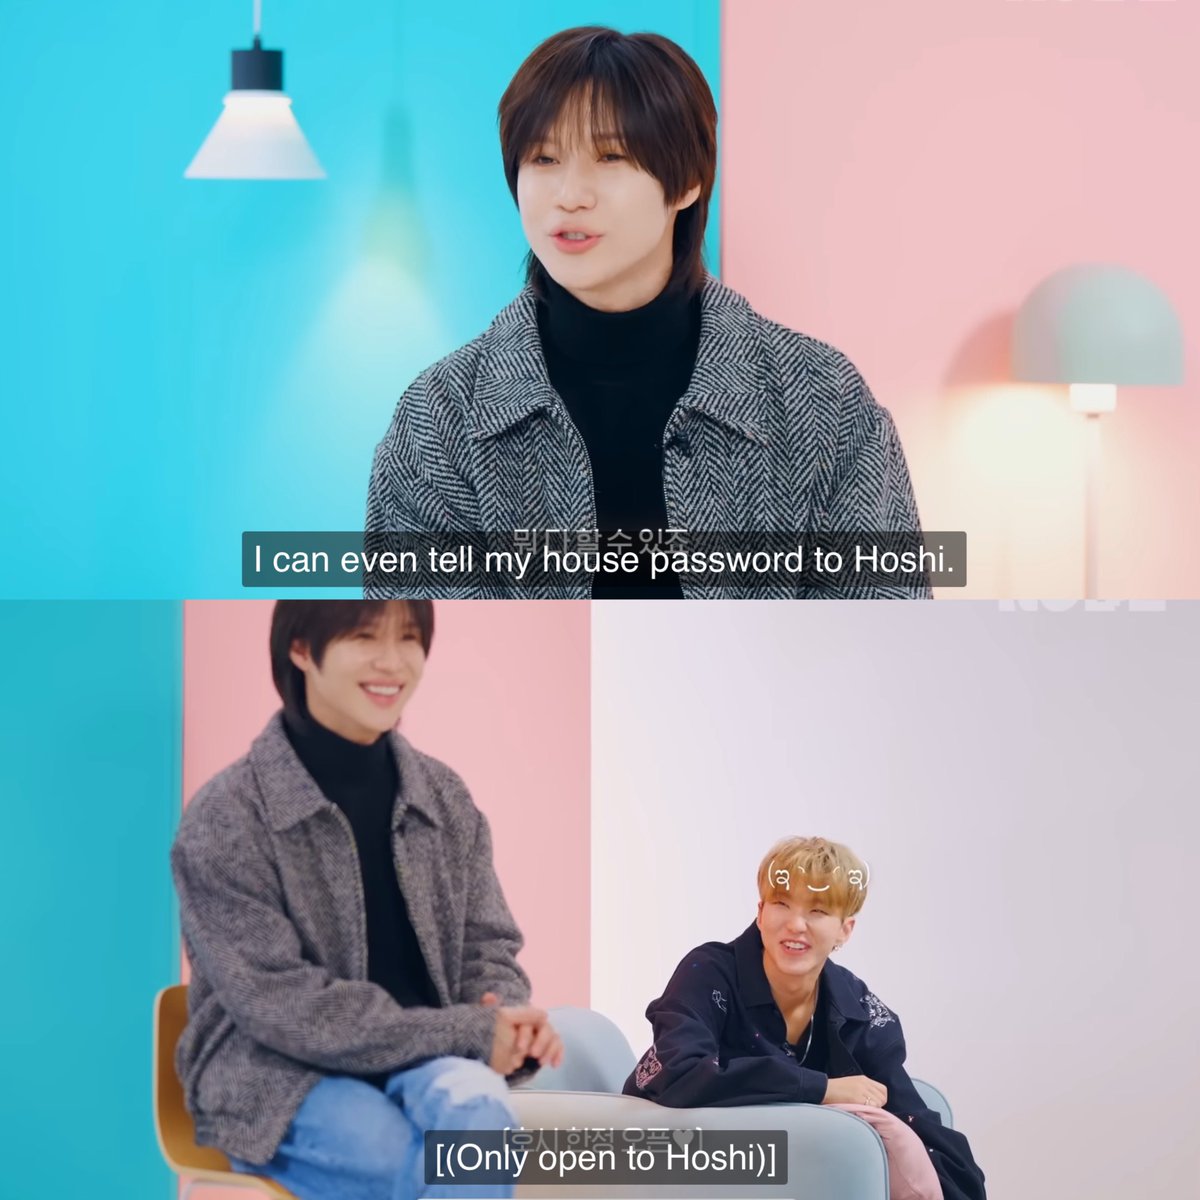 doyoung inviting hoshi to come over to his place and offering to cook for him vs taemin offering to tell hoshi his very own house password